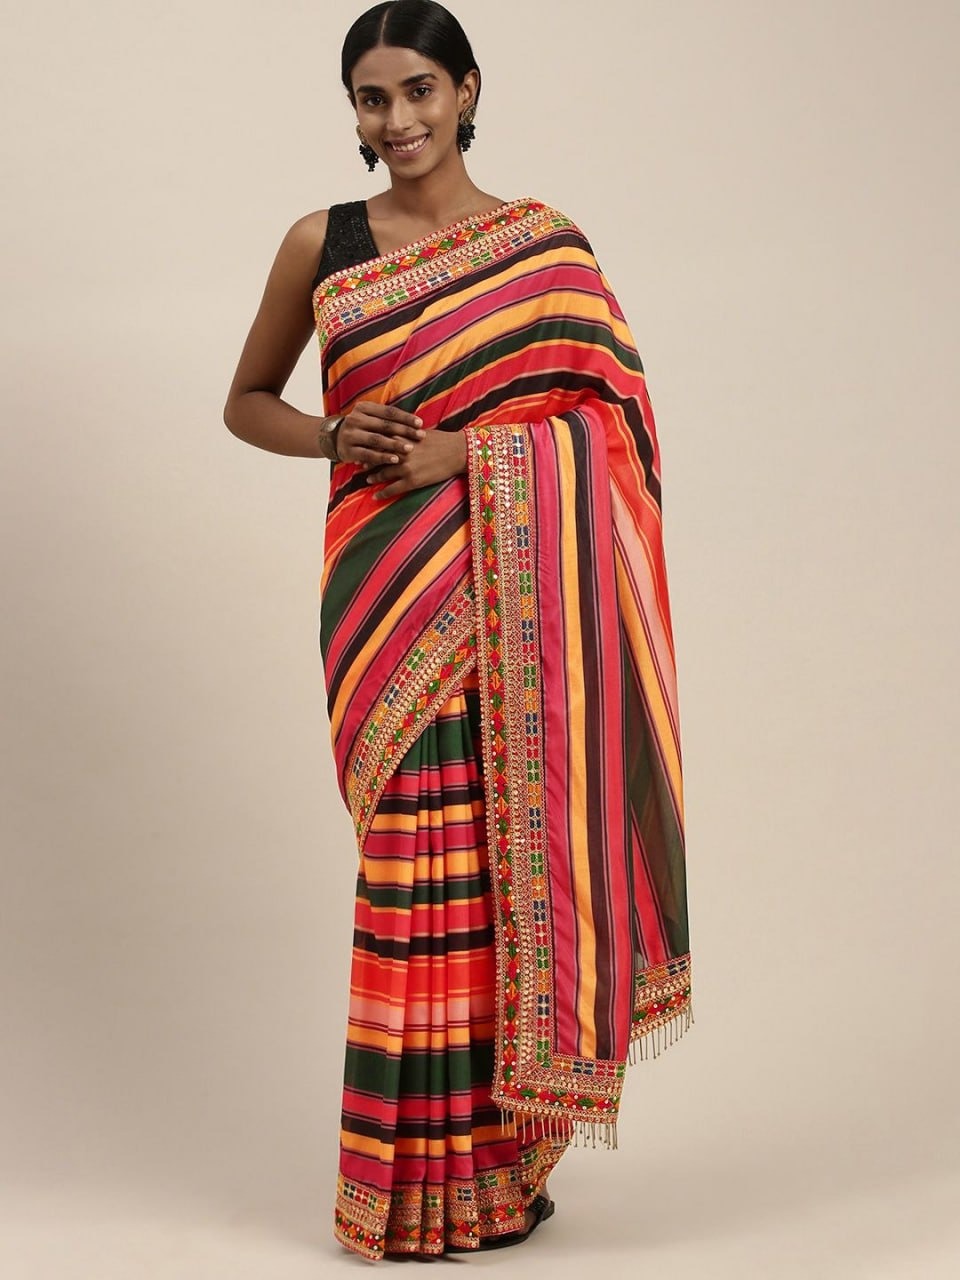 RV Creation presents a new sari product in the world of fashion